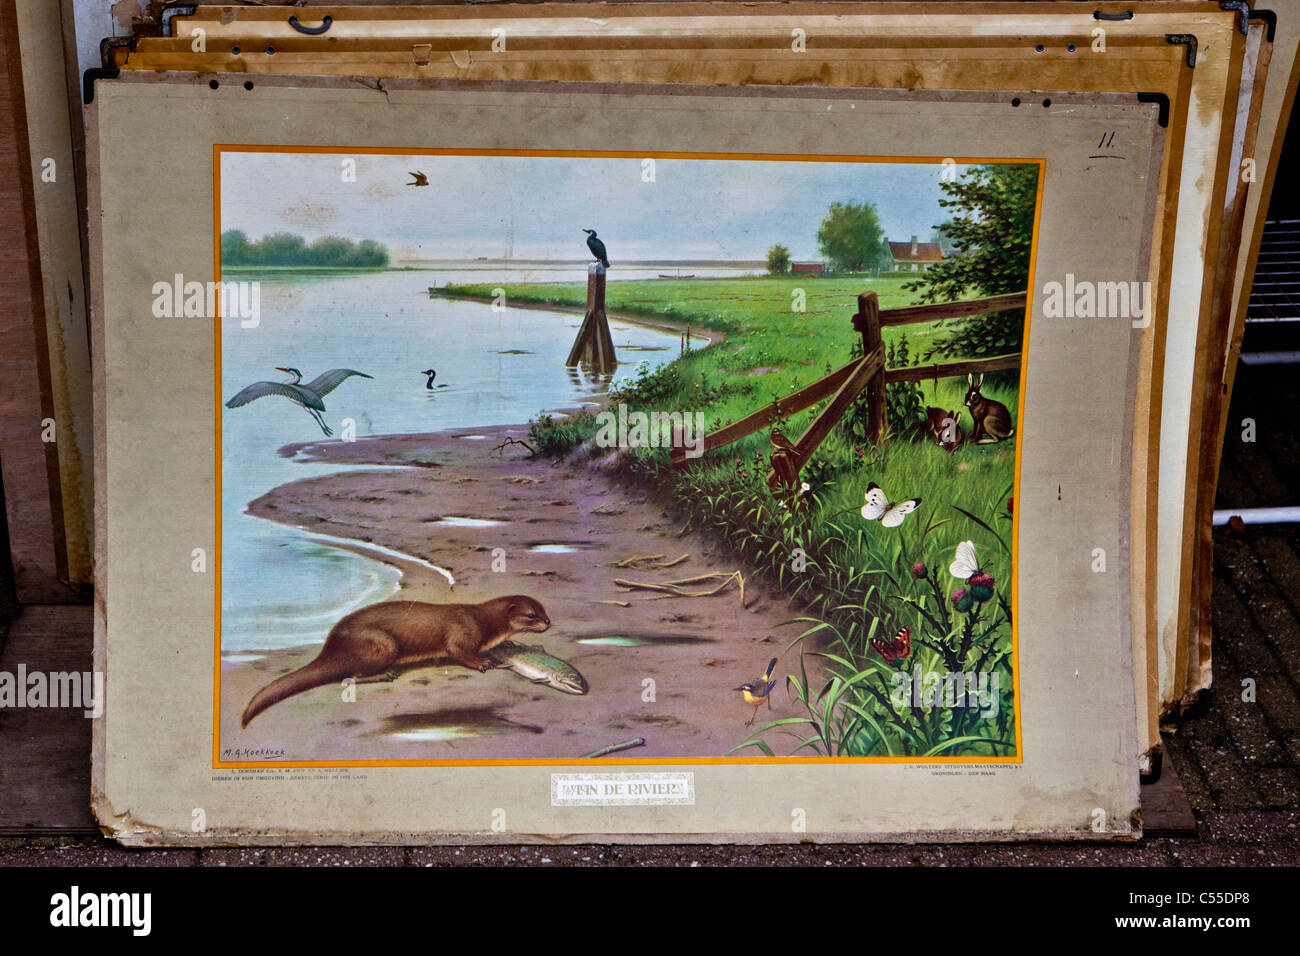 The Netherlands, Bredevoort, historical village. Antique books shop. Old painting, to educate children on nature in Holland. Stock Photo